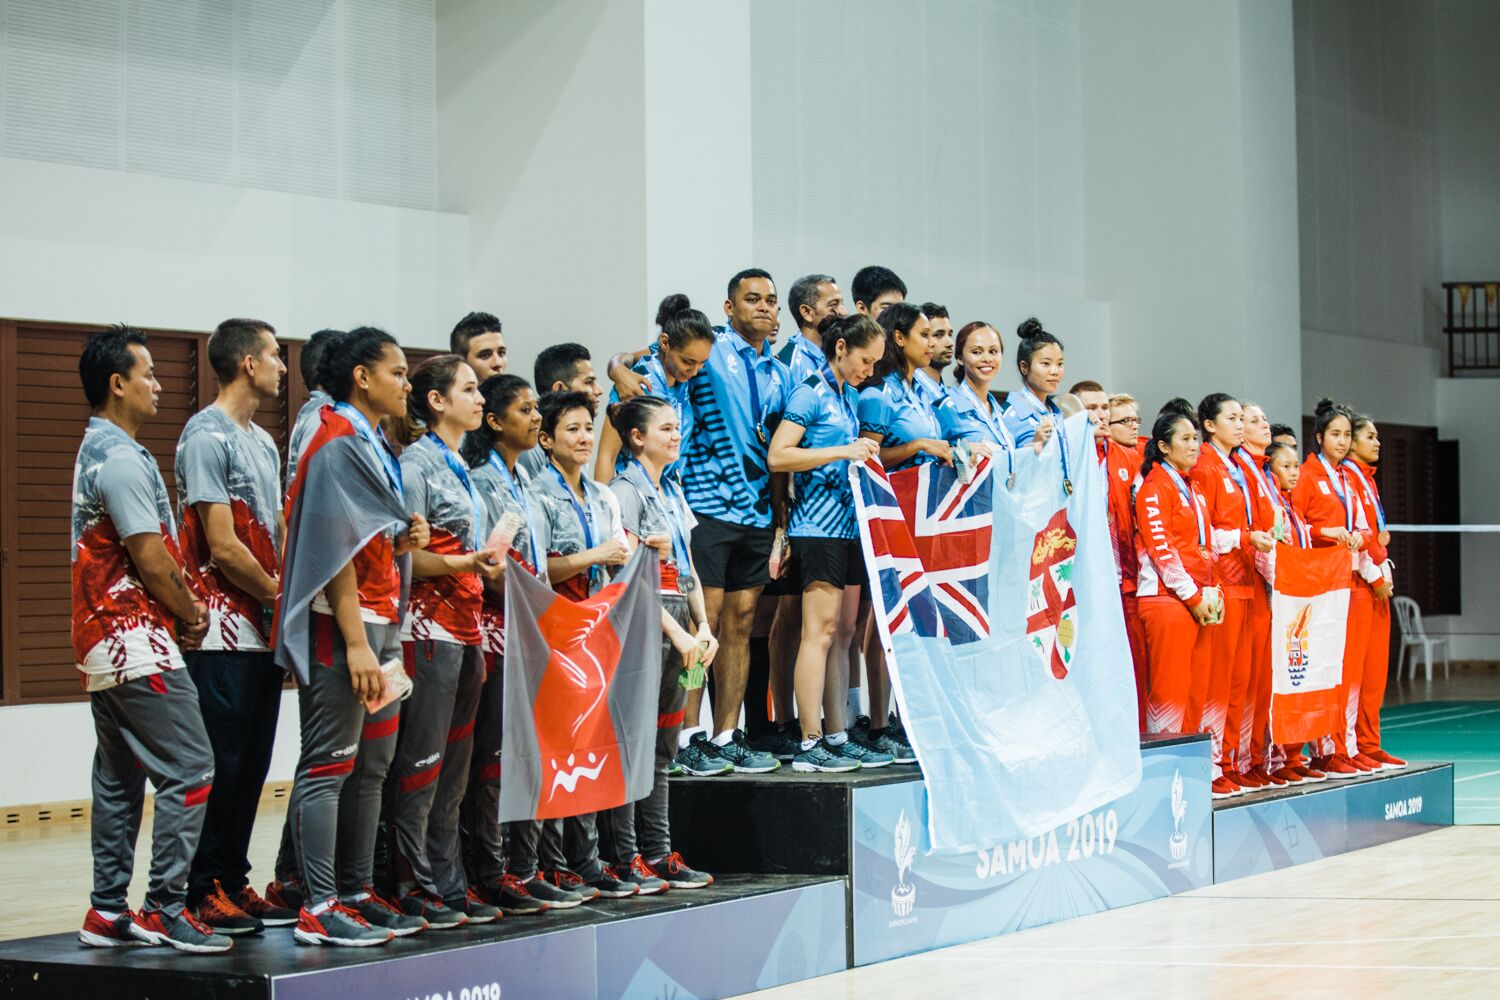 Fiji clinched a dramatic mixed team badminton title after the top three finished with the same record ©Samoa 2019/Trina Edwards